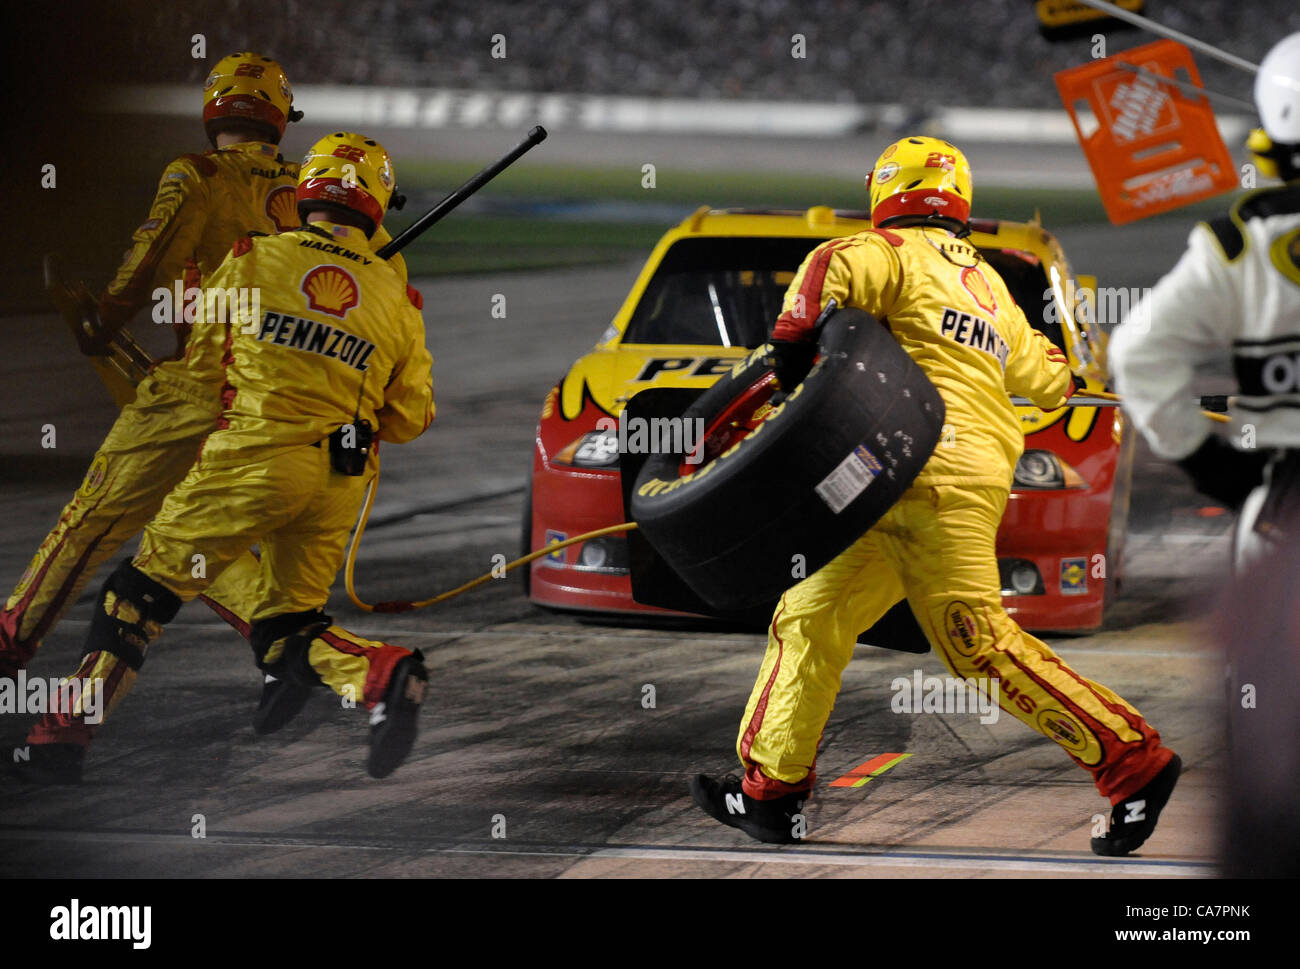 April 14, 2012 - Fort Worth, TX, USA - April 14, 2012 Ft. Worth, Tx. USA. Pit crews scramble during the NASCAR Sprint Cup Samsung 500 race at Texas Motor Speedway in Ft. Worth, Tx. (Credit Image: © Ralph Lauer/ZUMAPRESS.com) Stock Photo